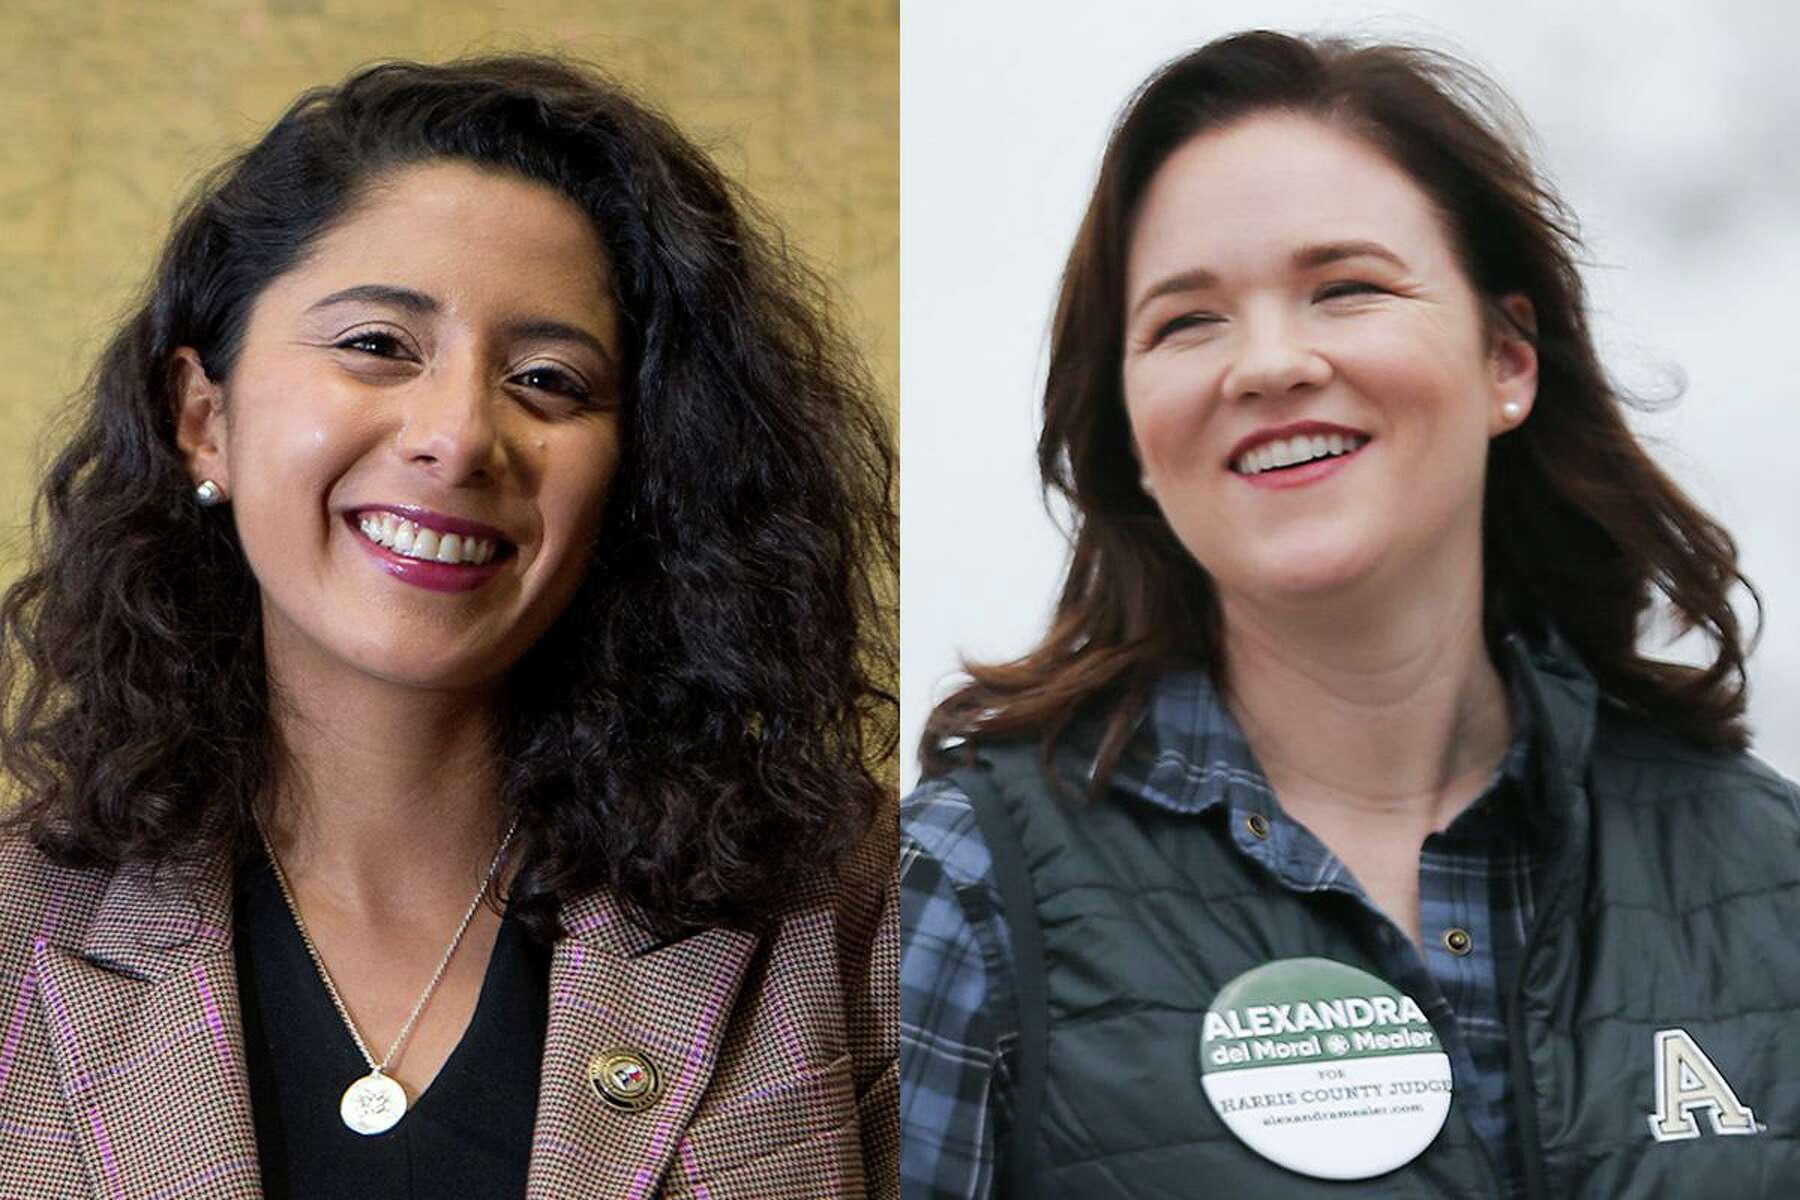 Lina Hidalgo vs Alex Mealer for Harris County judge: What to know